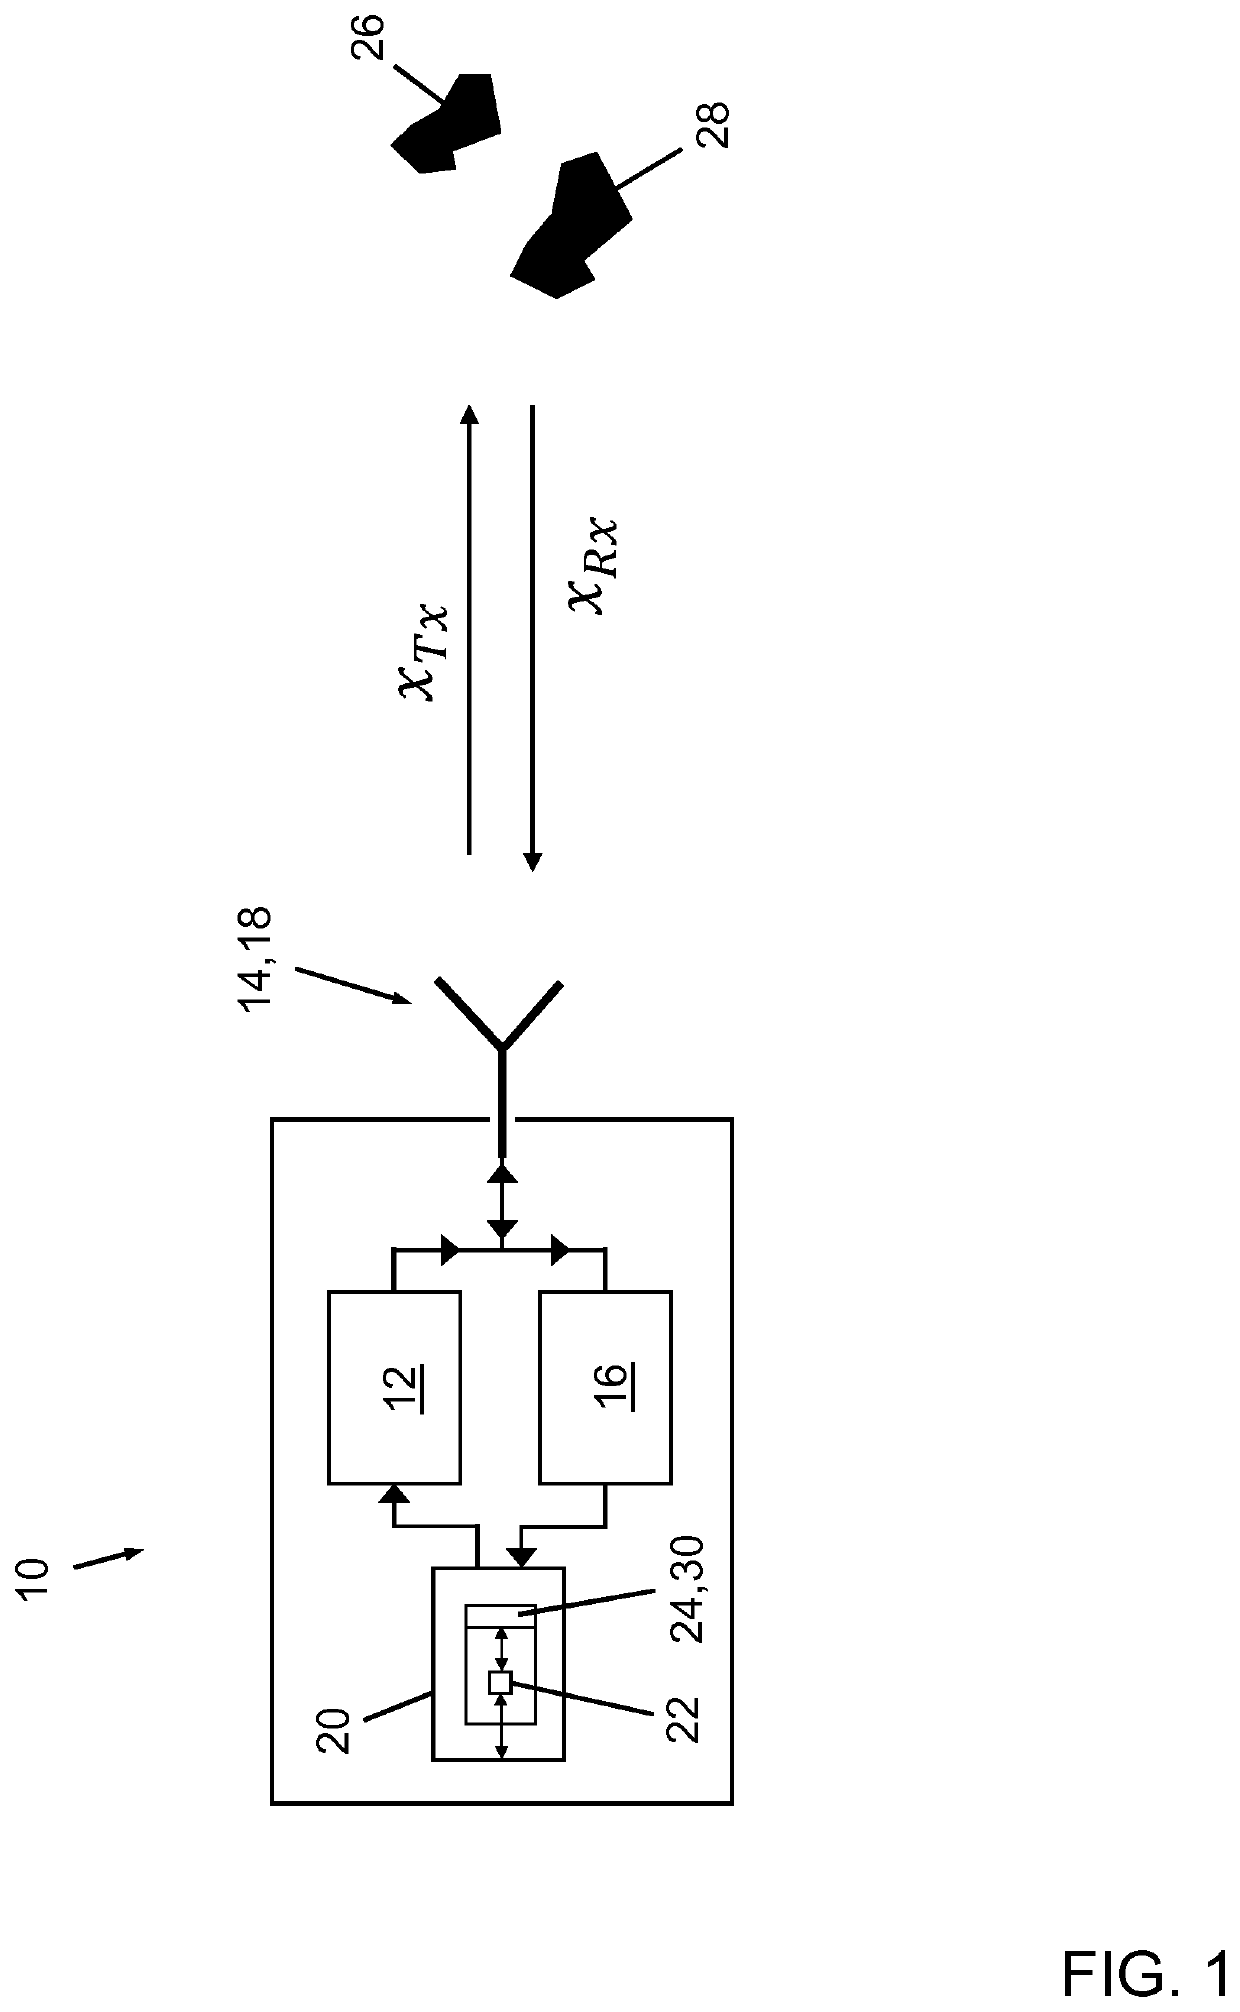 Interference mitigation in automotive radar systems by artificial doppler modulation